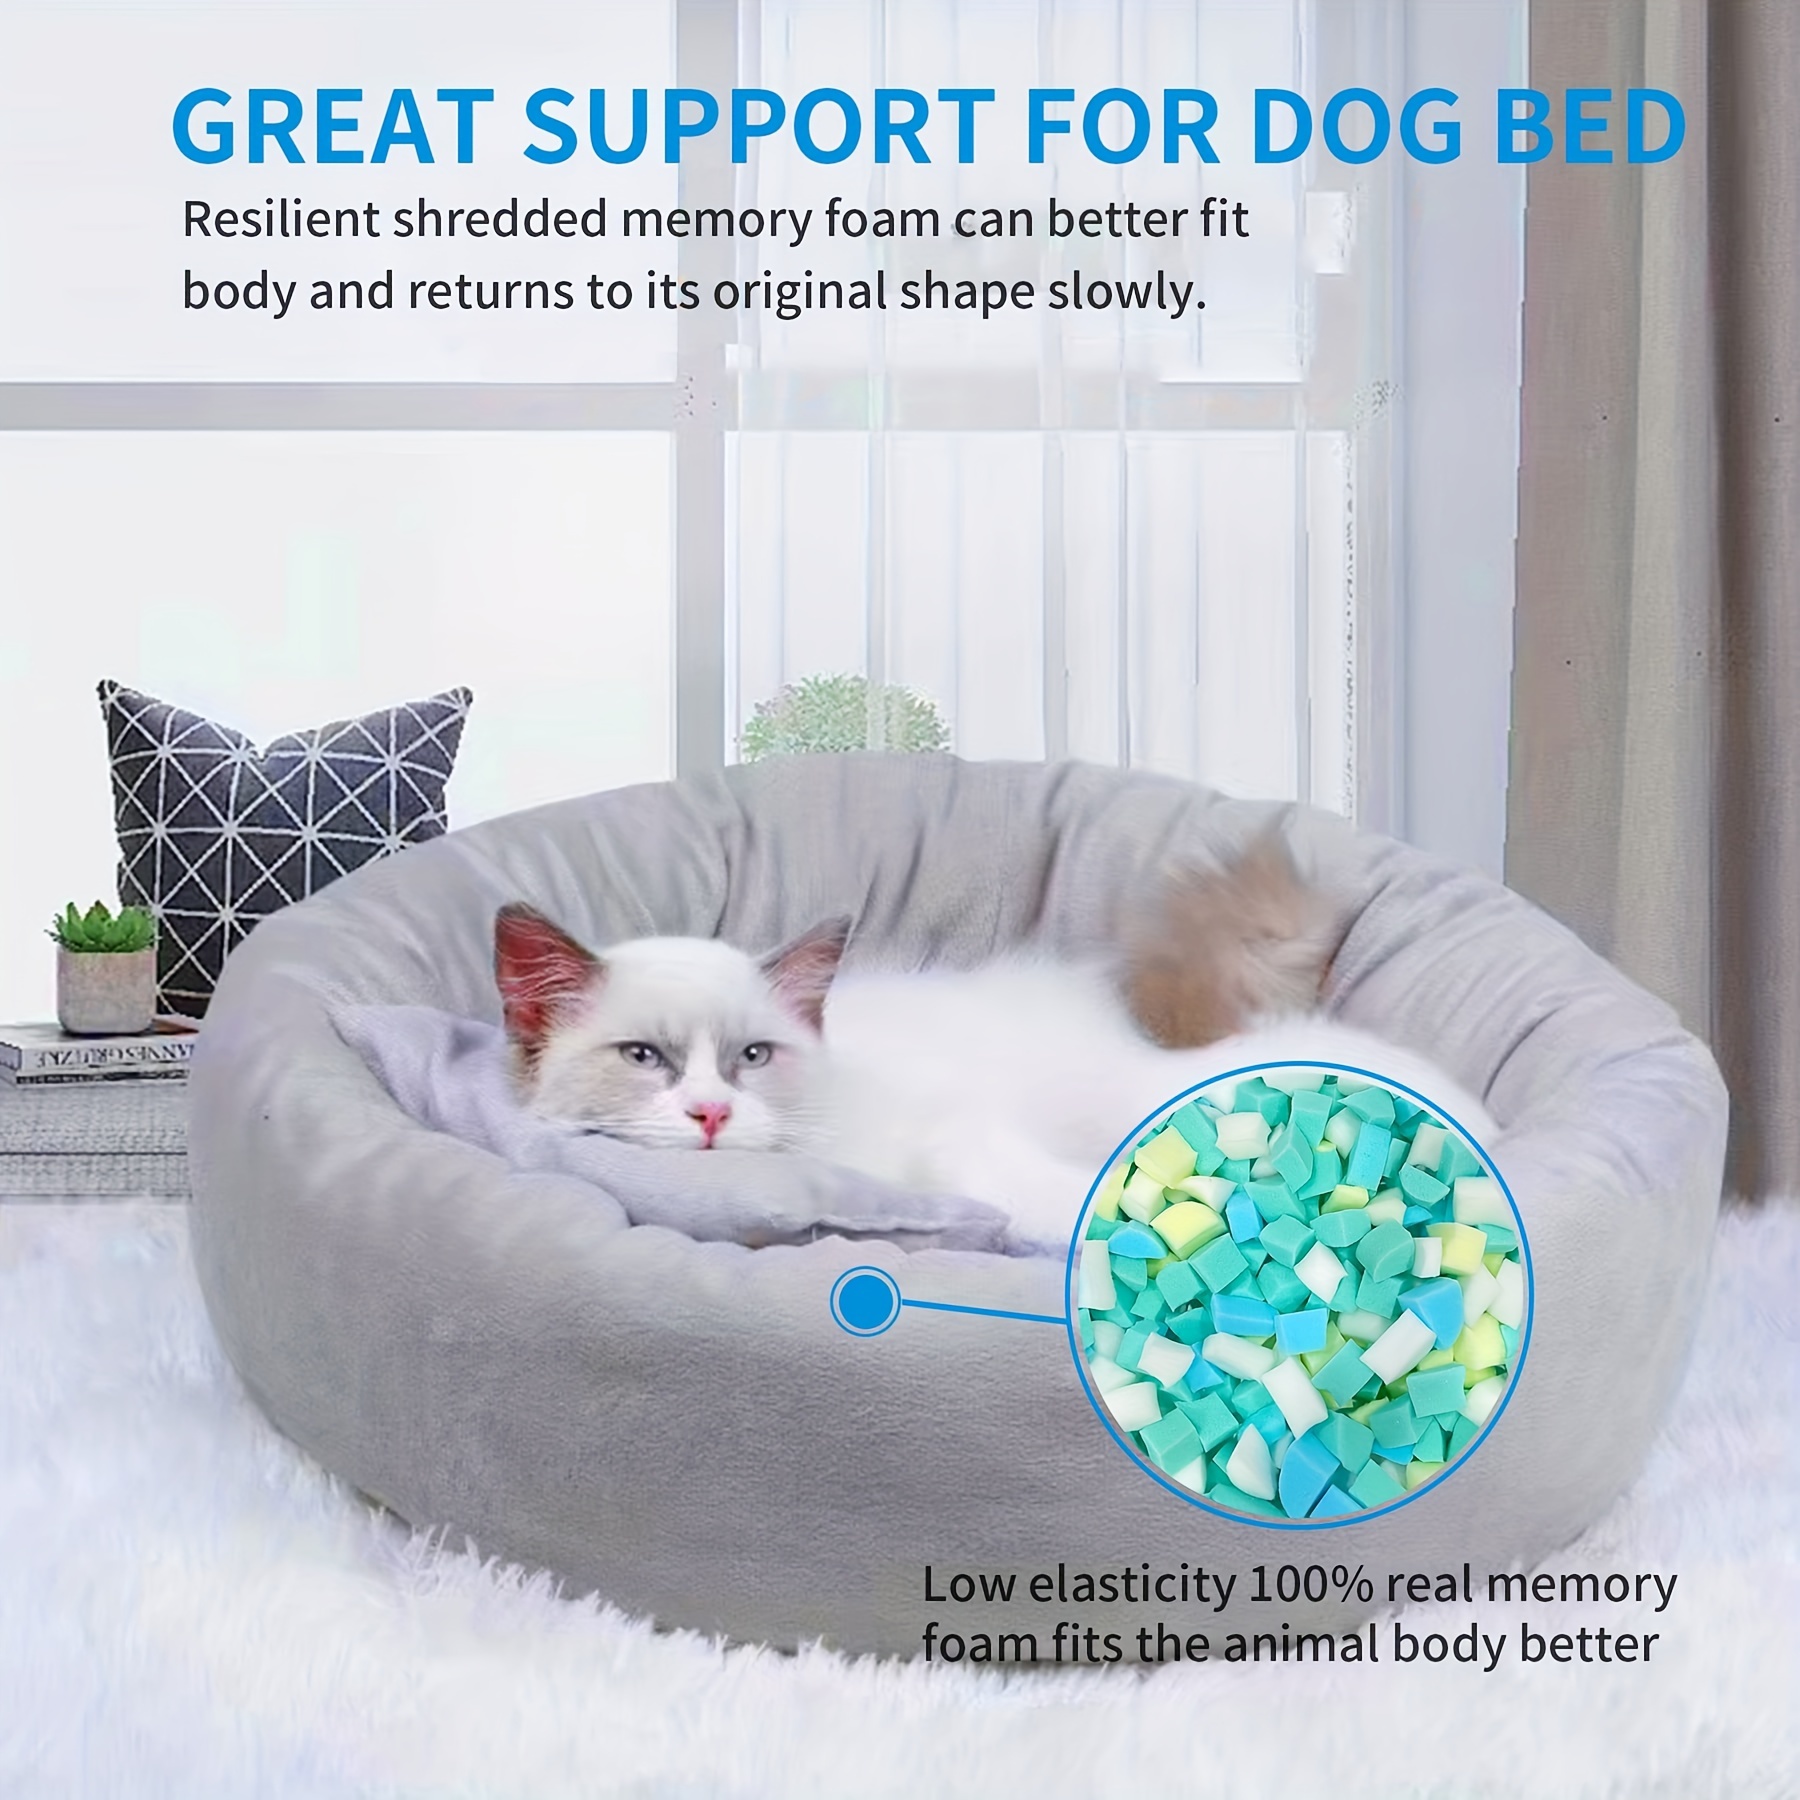 Shredded Memory Foam Fill for Cushions, Crafts, Bean Bags, Pillows, or Dog  Beds, Made in the USA Lounj Bedding 